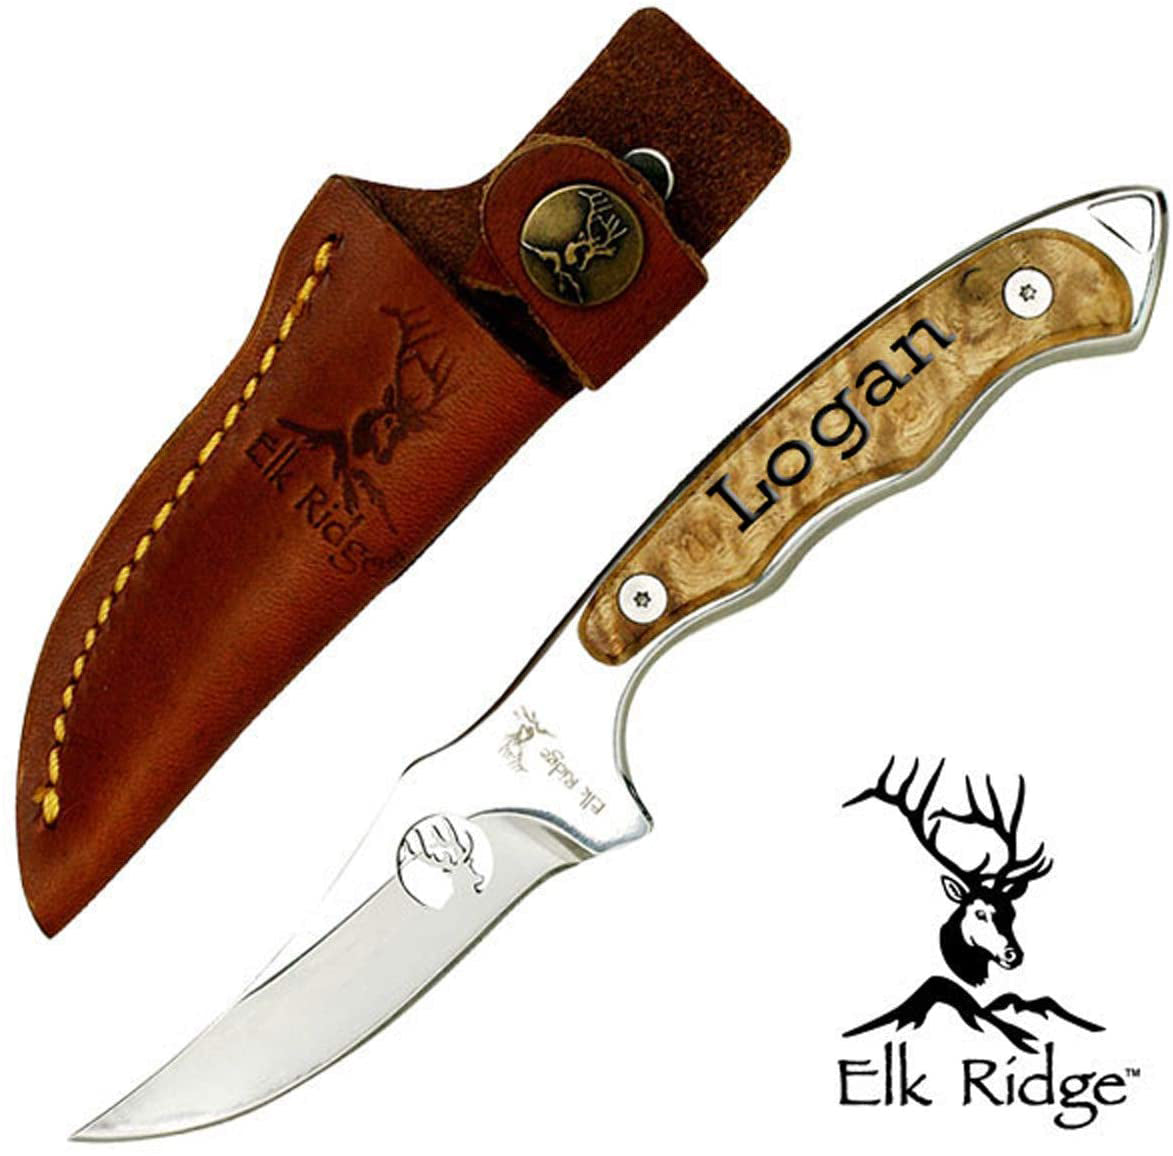 GIFTS INFINITY Personalized Free Engraving 7" Overall Fixed Blade Pocket Knife, Camping Knife with Wooden Handle and Sheath